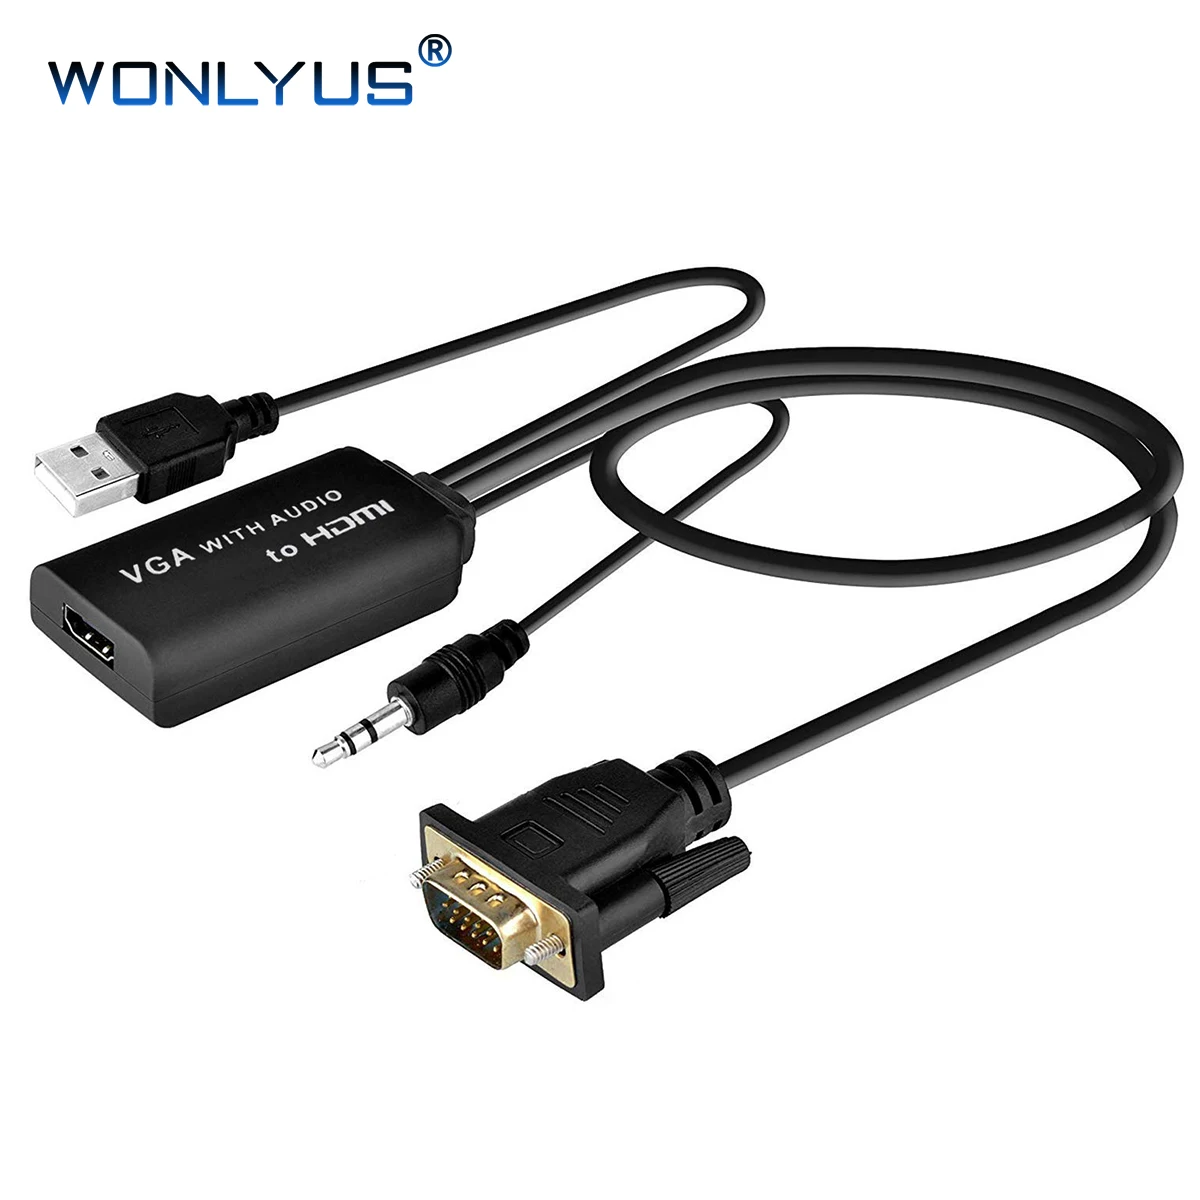 how to connect laptop to projector with hdmi cable to hdmi